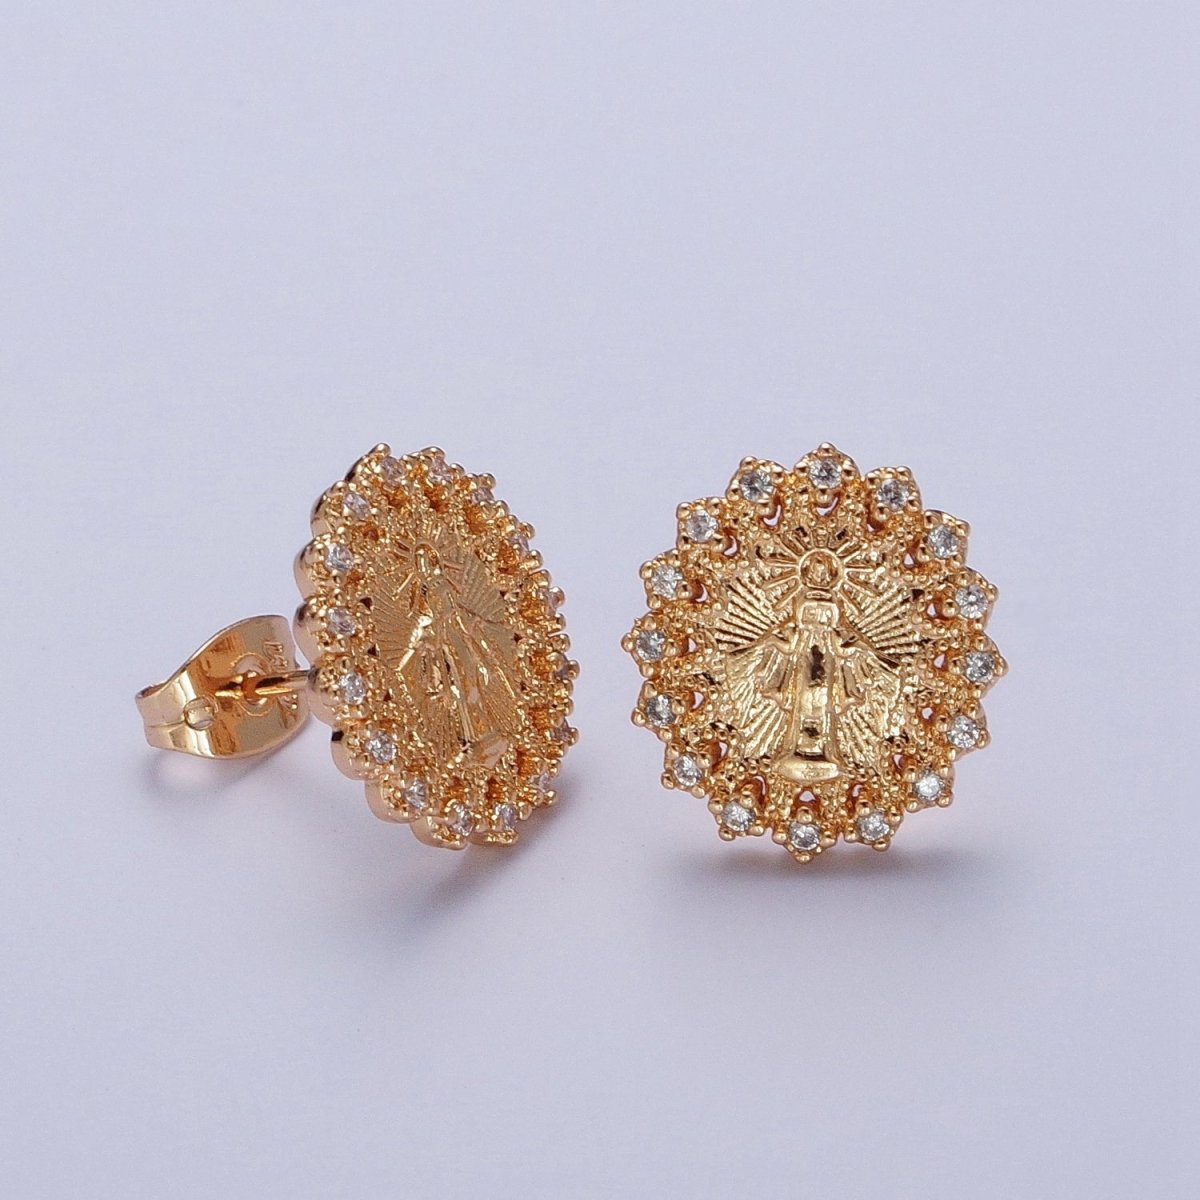 Micro Pave Gold Virgin Mary Stud Earring SUN Medallion Miraculous Lady Earring Catholic Religious Jewelry Gift AE-1044 - DLUXCA